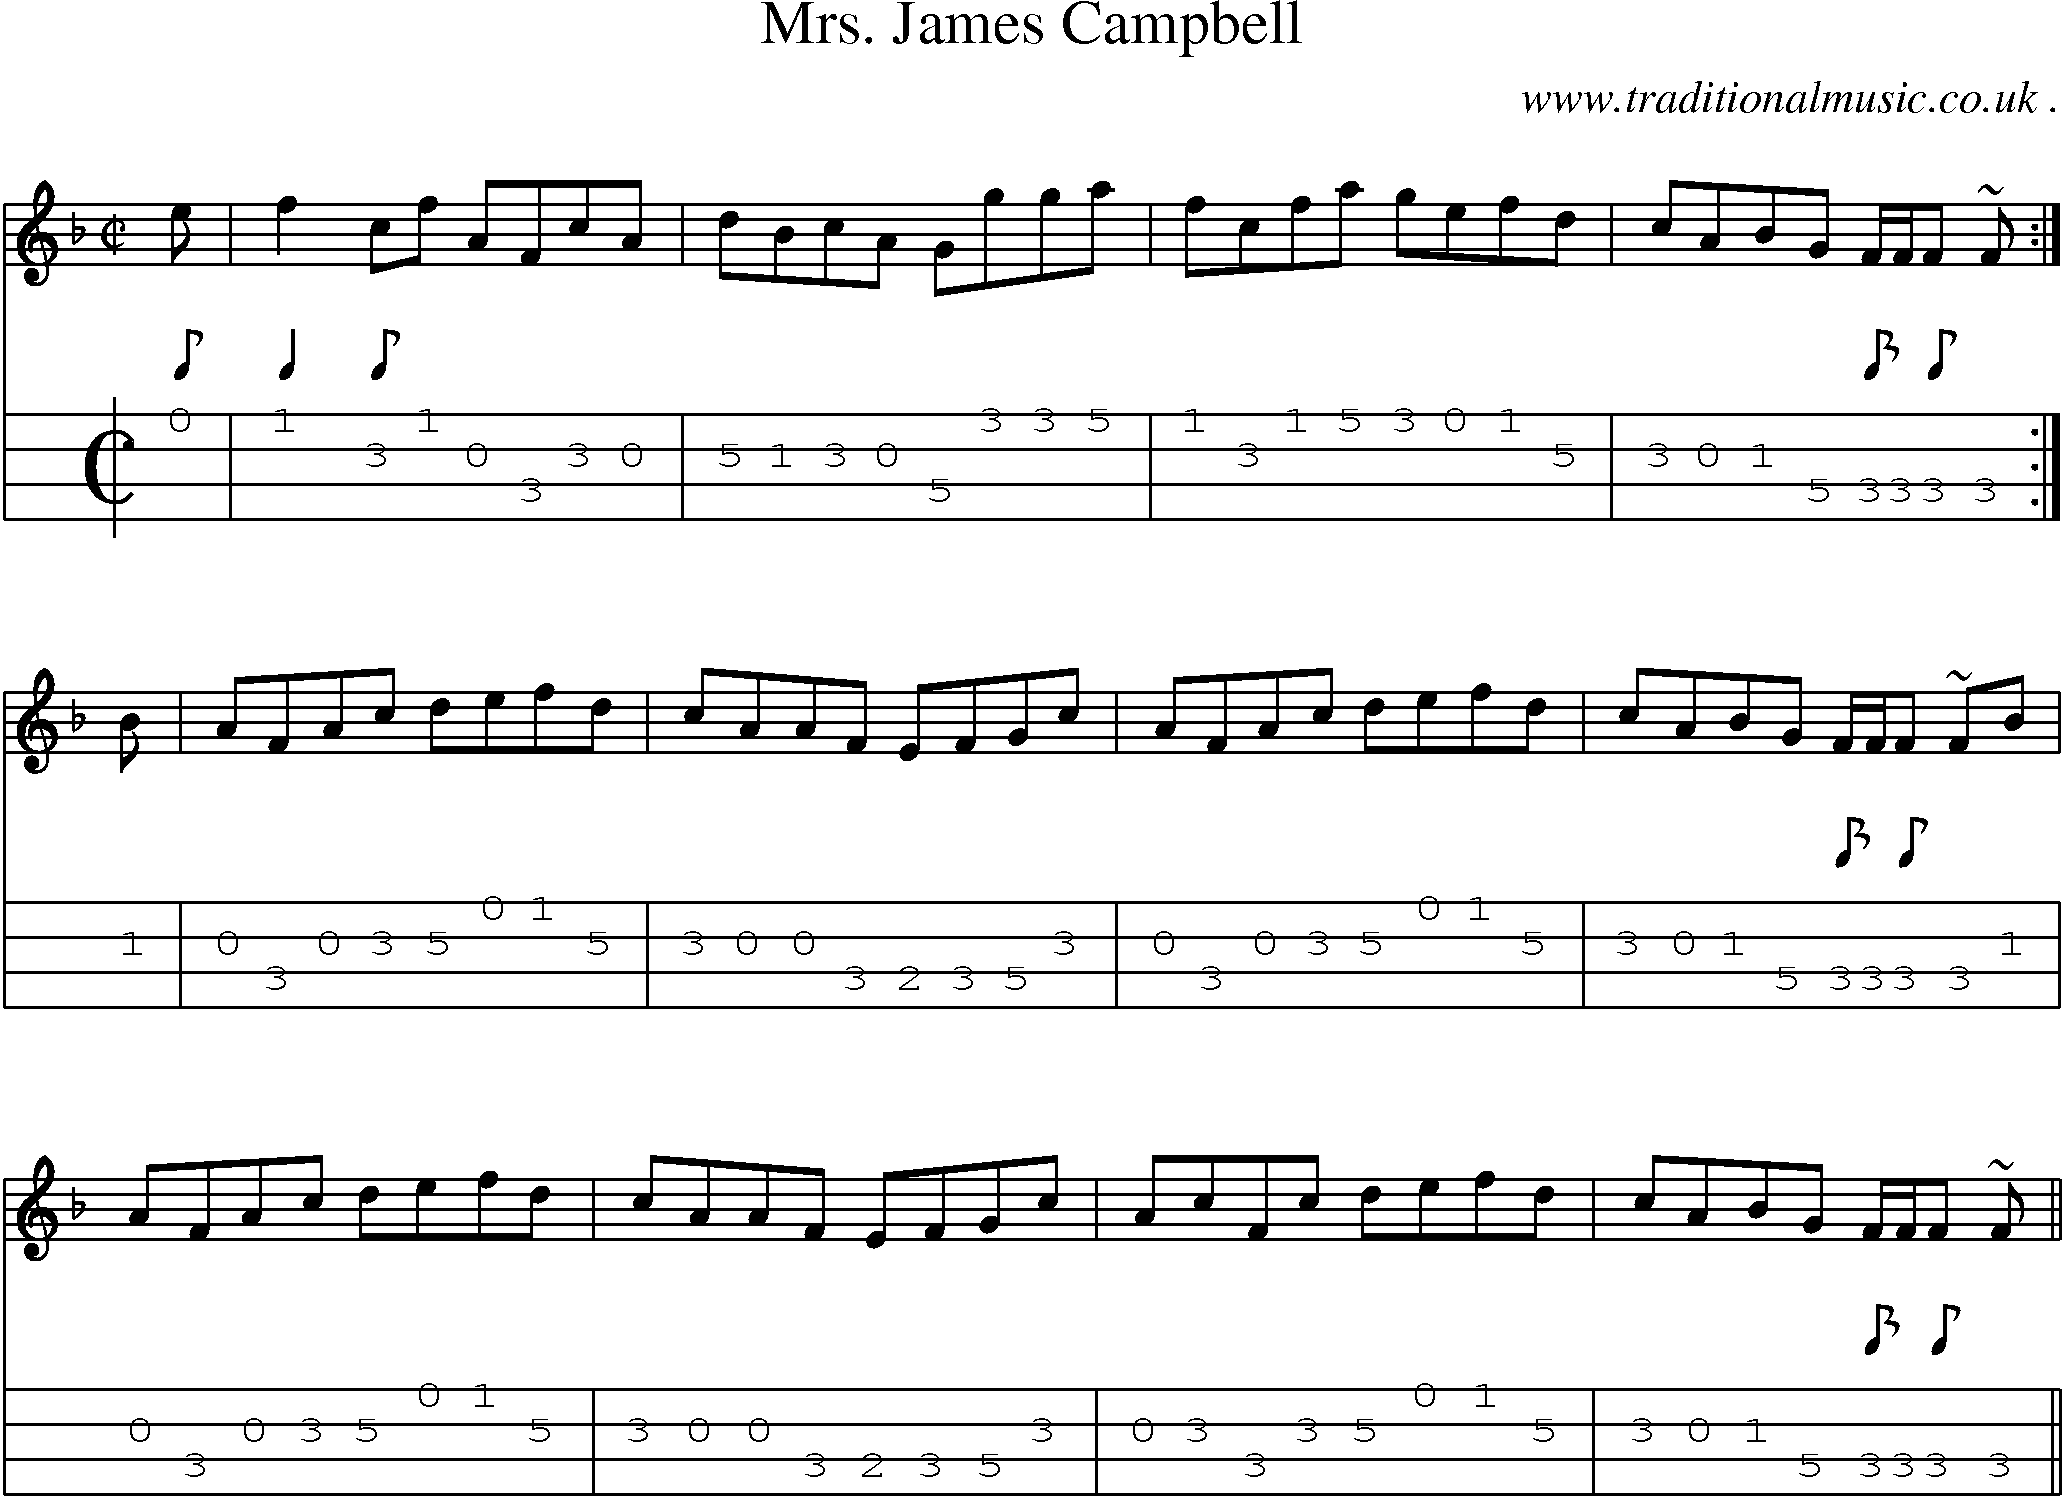 Sheet-music  score, Chords and Mandolin Tabs for Mrs James Campbell